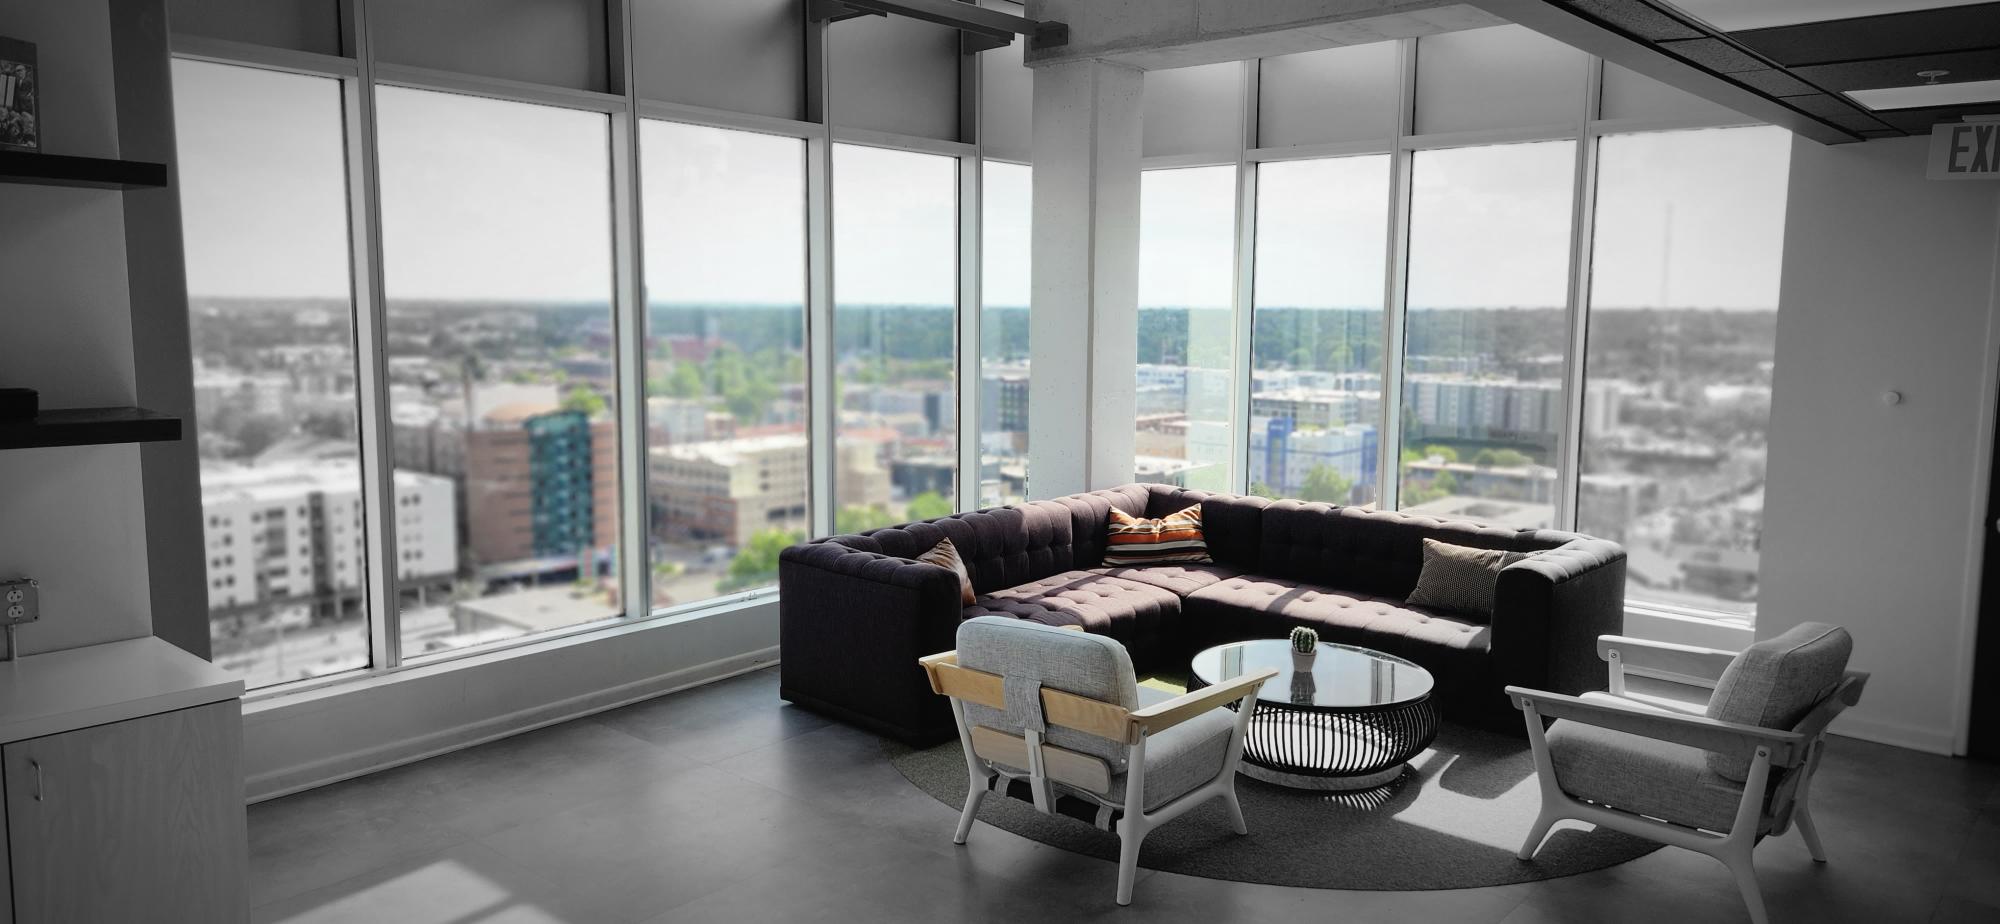 spacious community room with couch and tall windows overlooking city